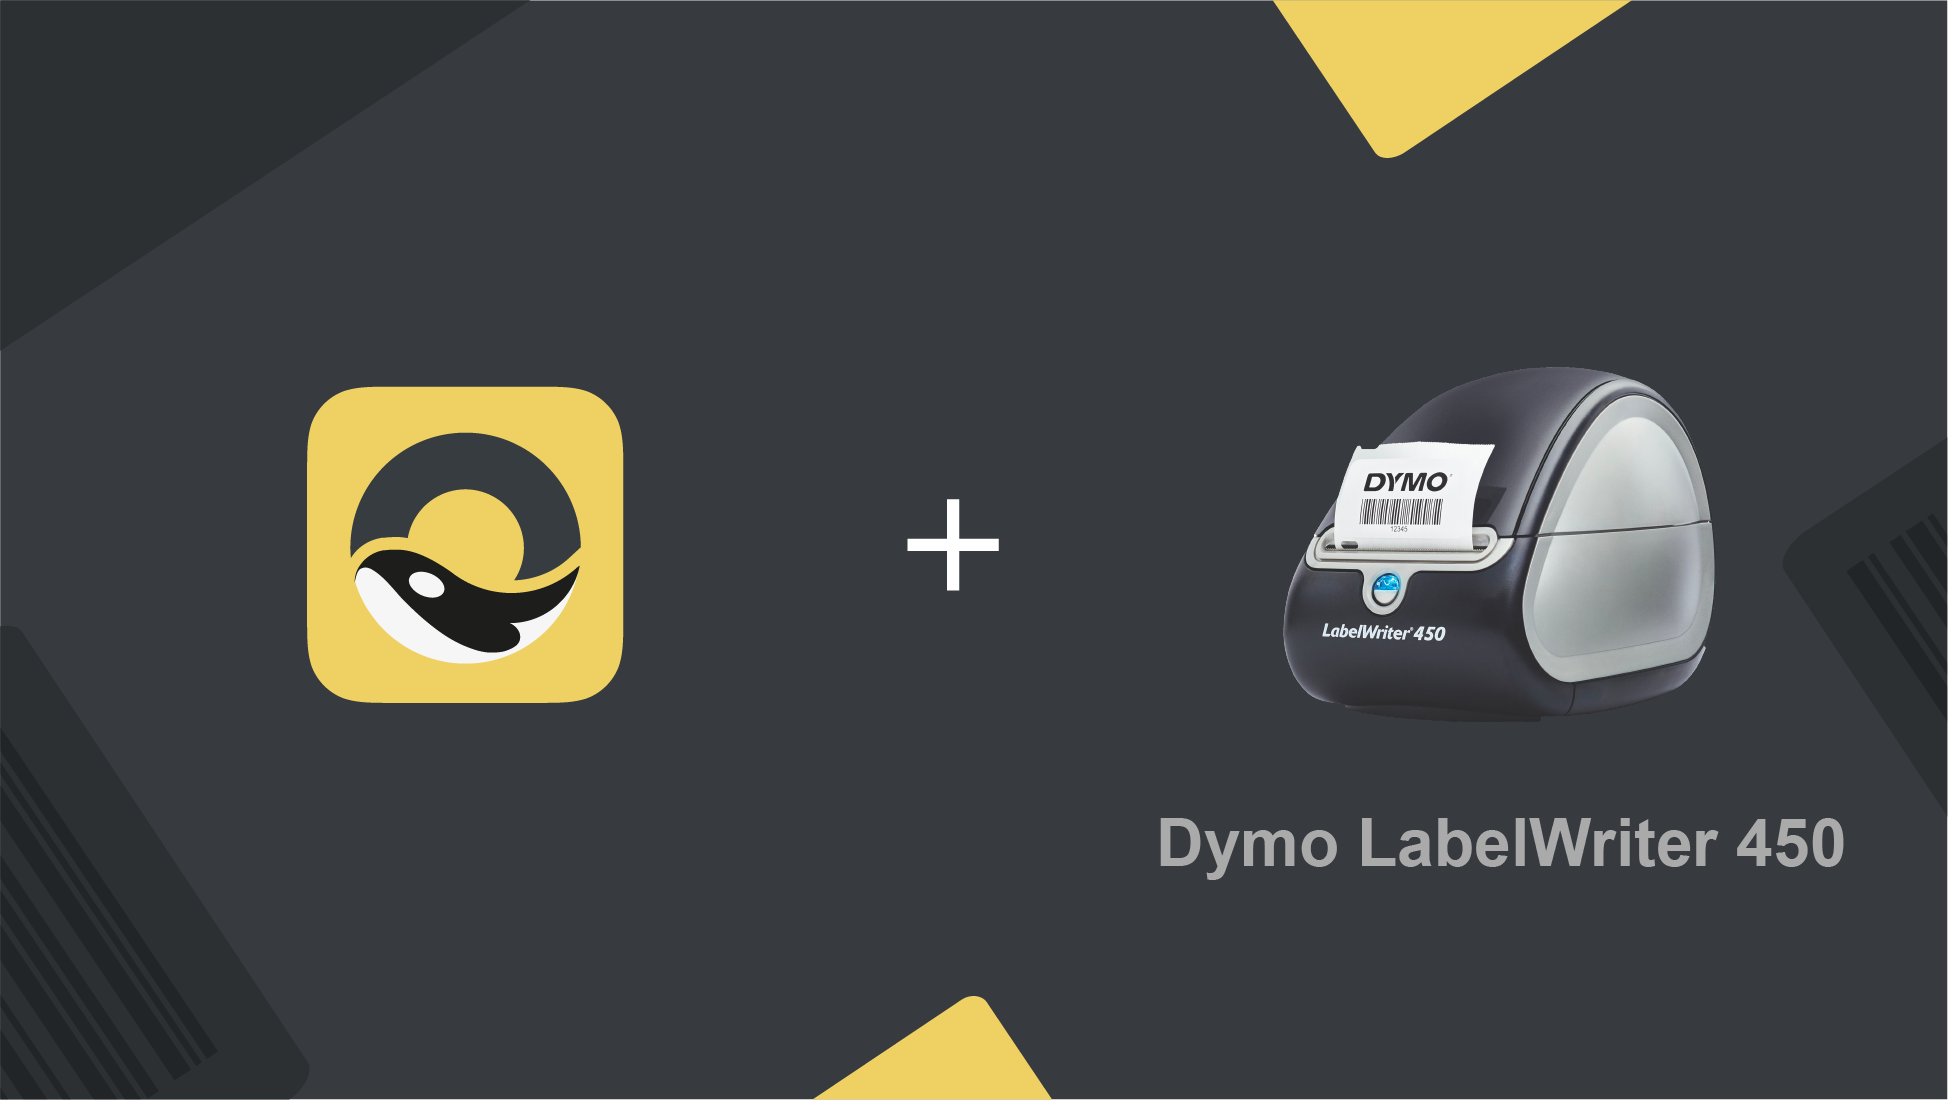 How to print barcodes on Dymo LabelWriter 450